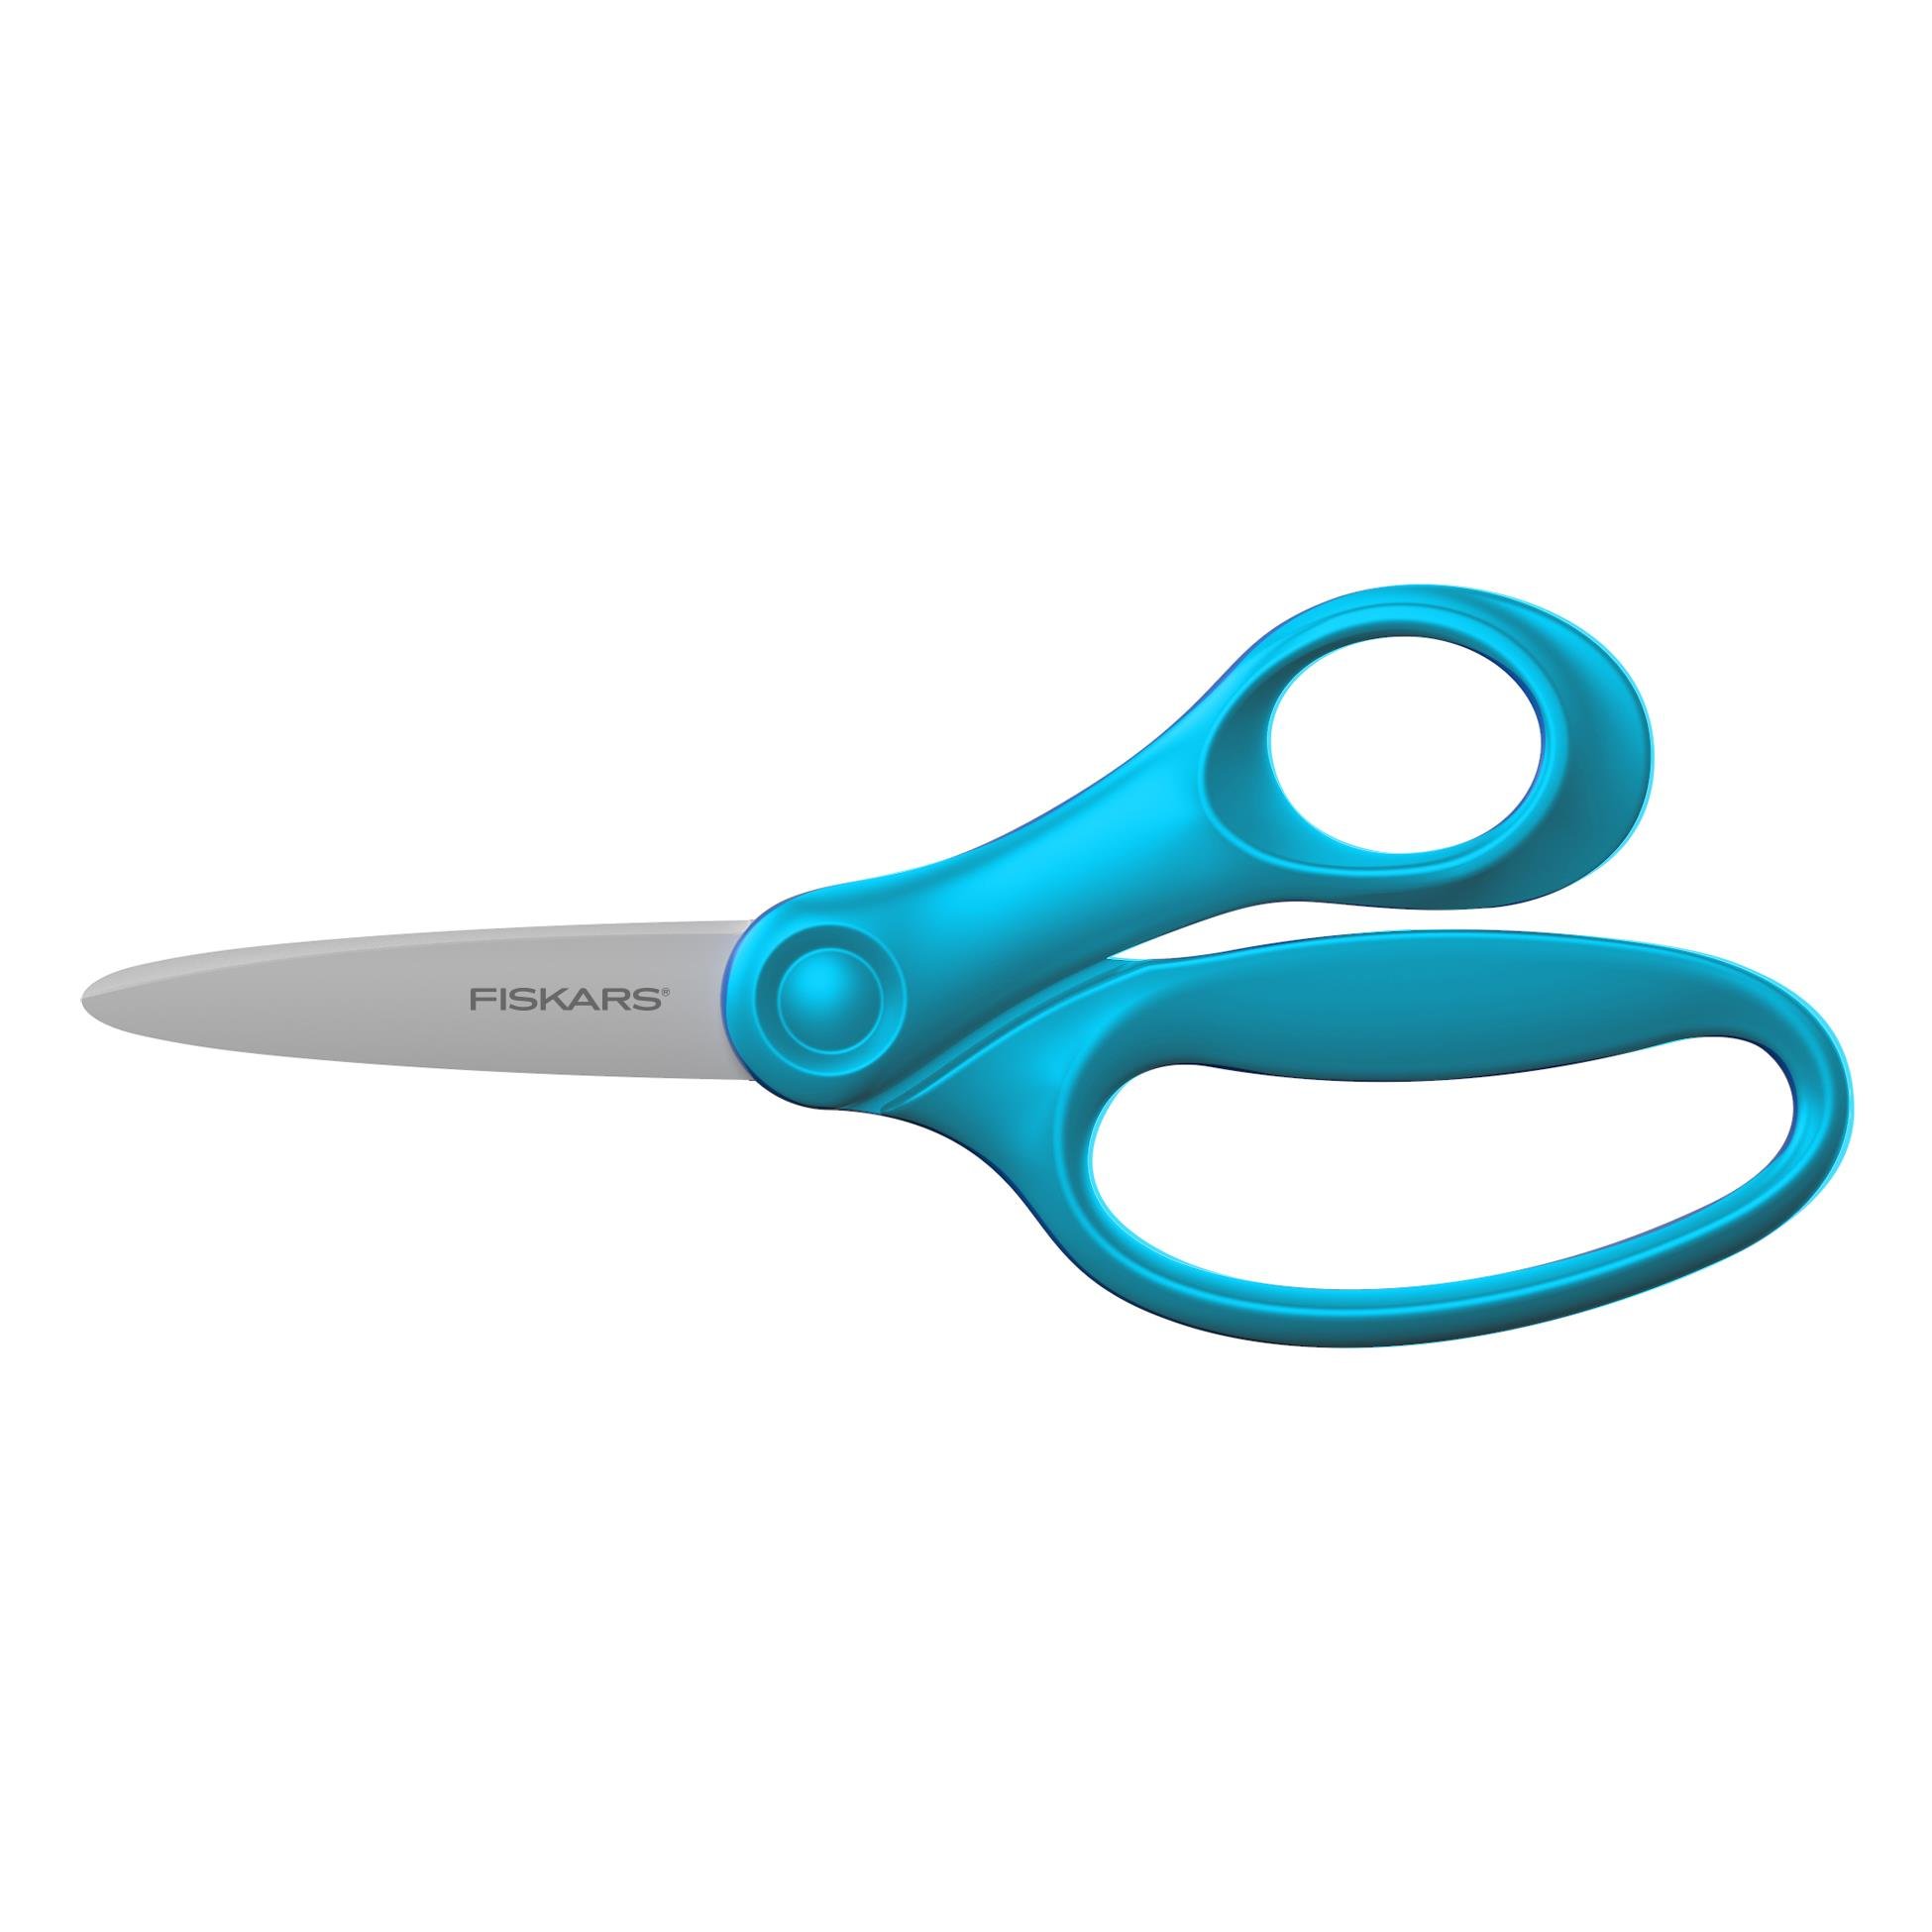 School Left-Handed Kids Scissors, Assorted Colors, 5 Pointed - ACM13178, Acme United Corporation